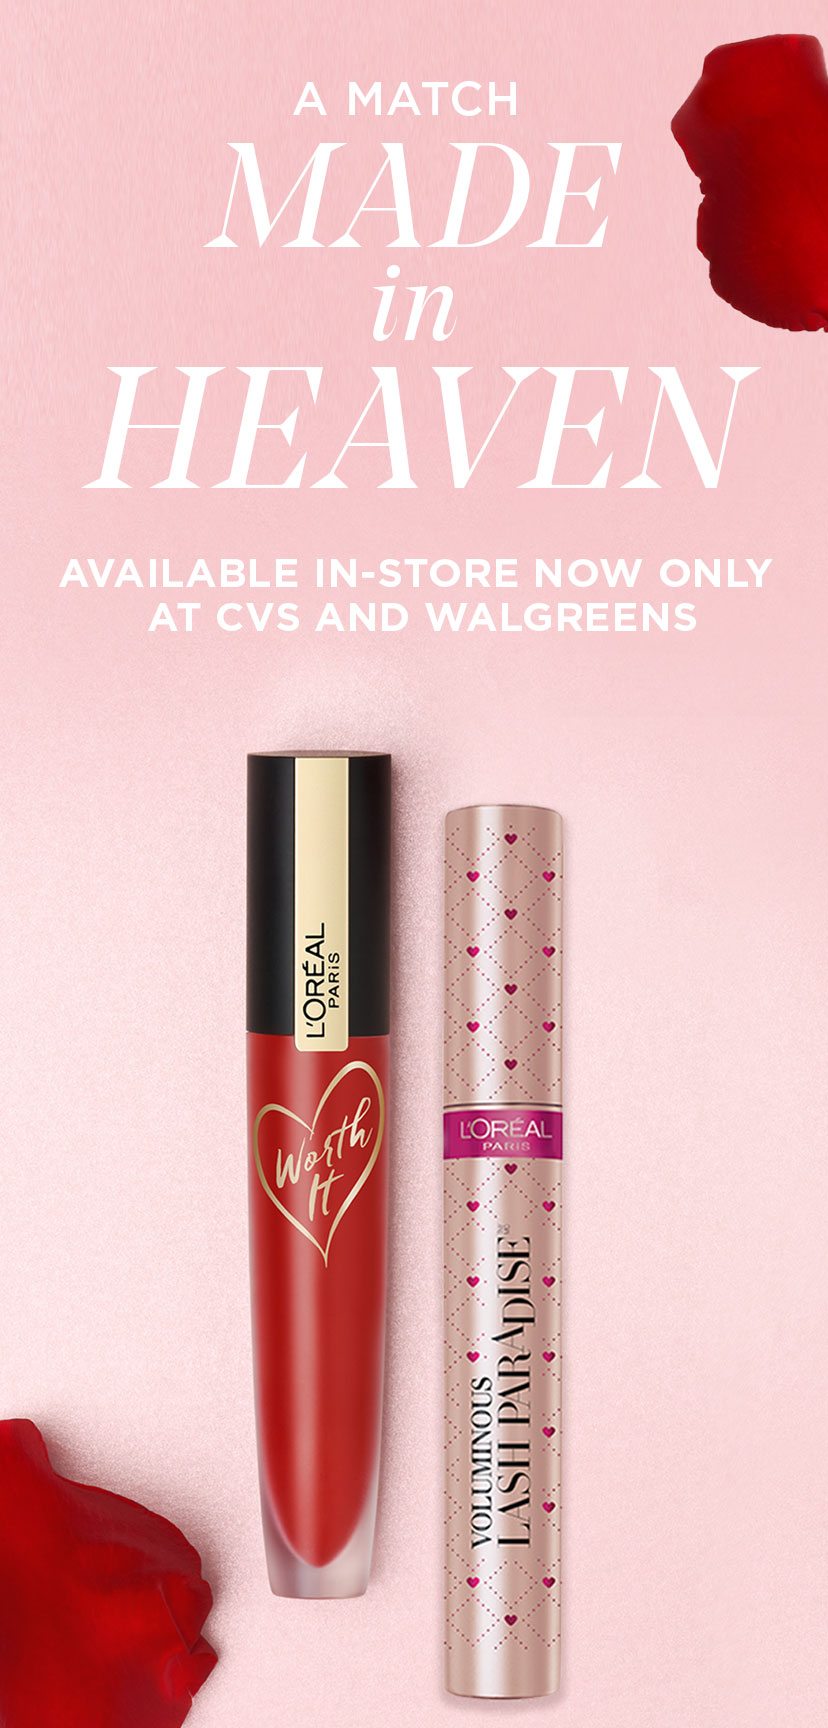 A MATCH MADE IN HEAVEN - AVAILABLE IN-STORE NOW ONLY AT CVS AND WALGREENS